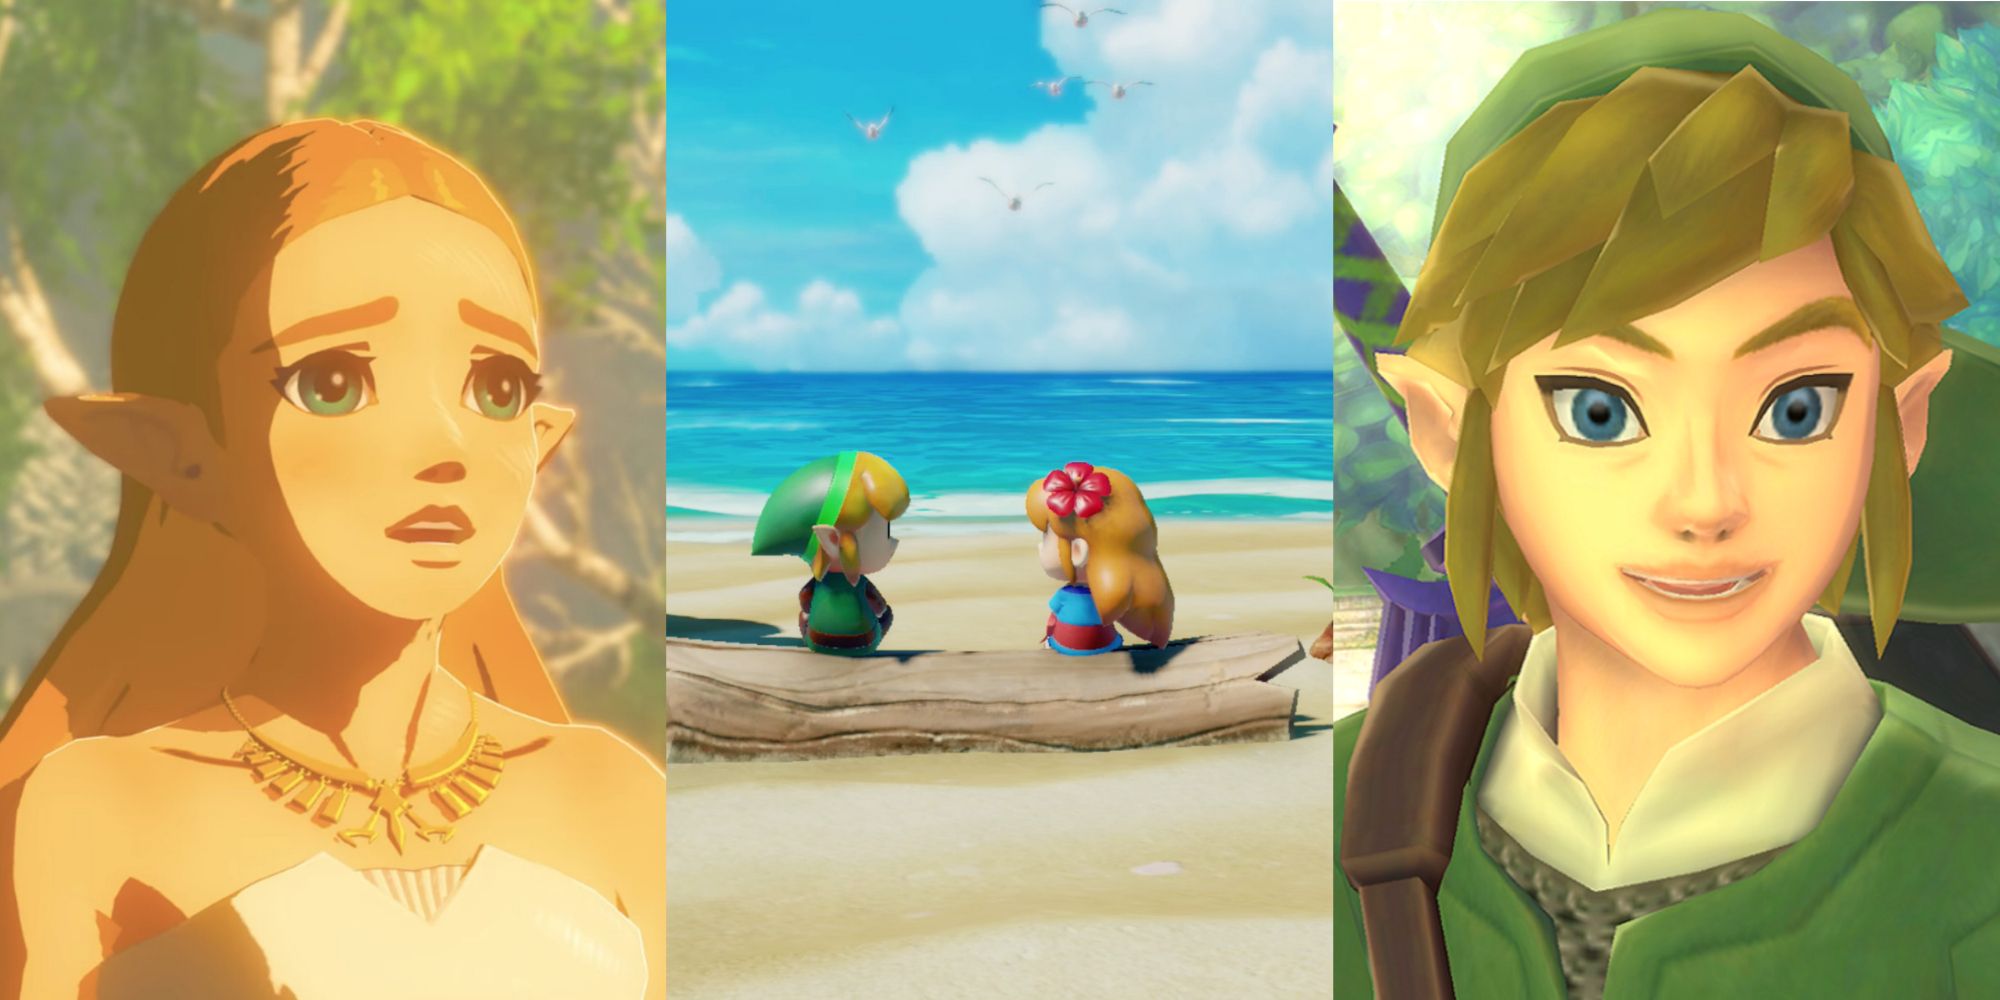 Split image screenshots of Zelda looking sorrowful in Breath of the Wild, Link and Marin sitting together in Link's Awakening, and a close-up of Link in Skyward Sword.